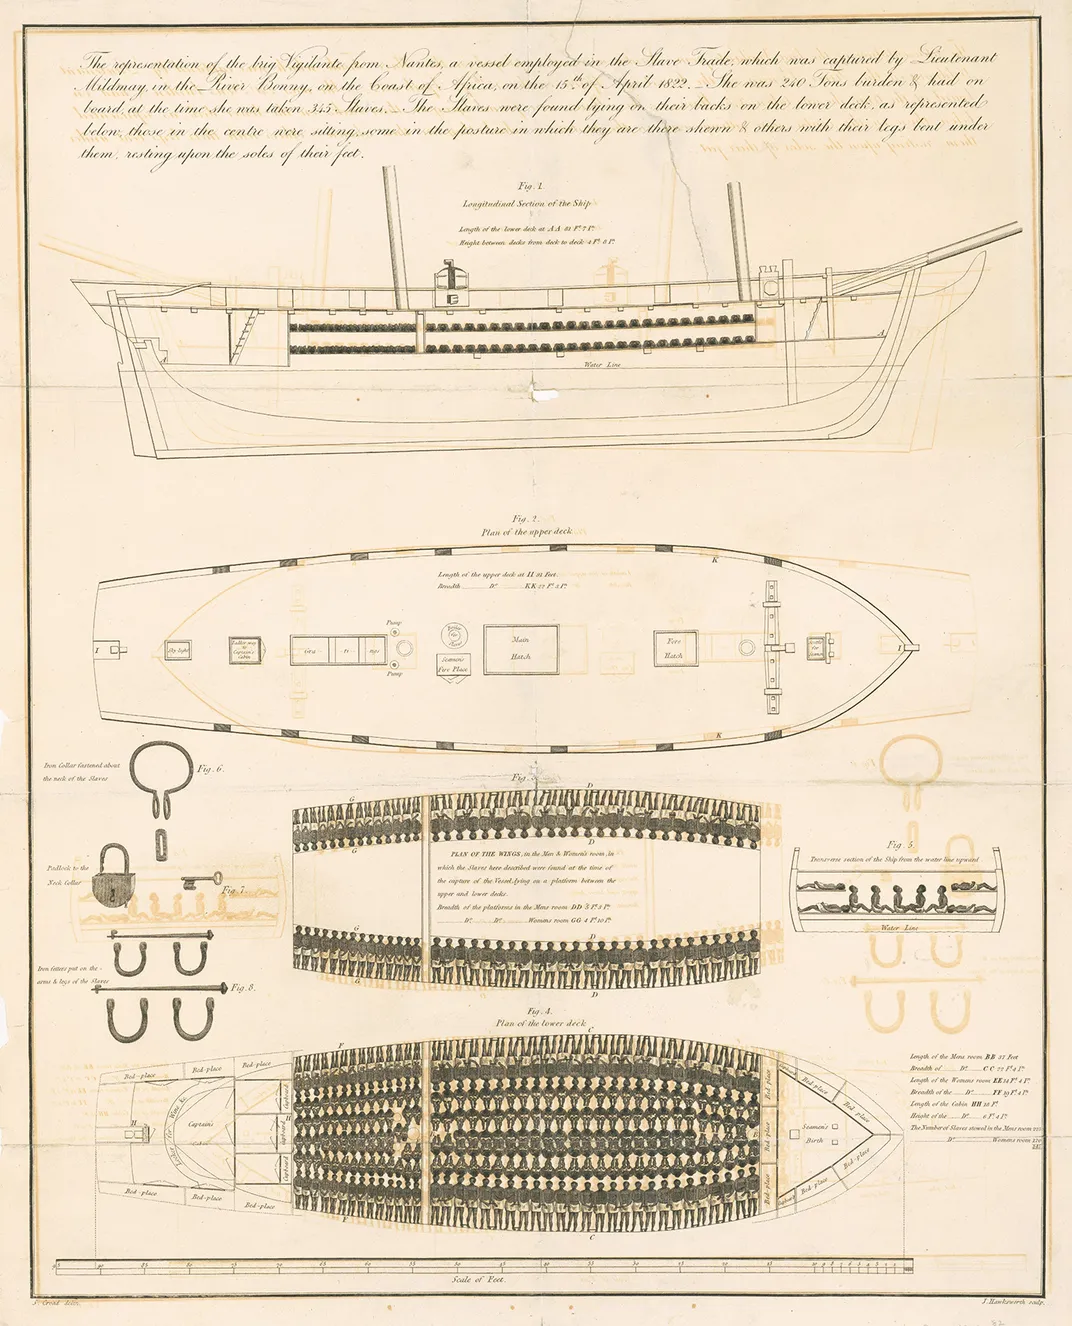 An illustration of the 19th-century ship Vigilante depicts how Africans were tightly arranged on board in shackles. About 10.7 million survived the Middle Passage across the Atlantic.